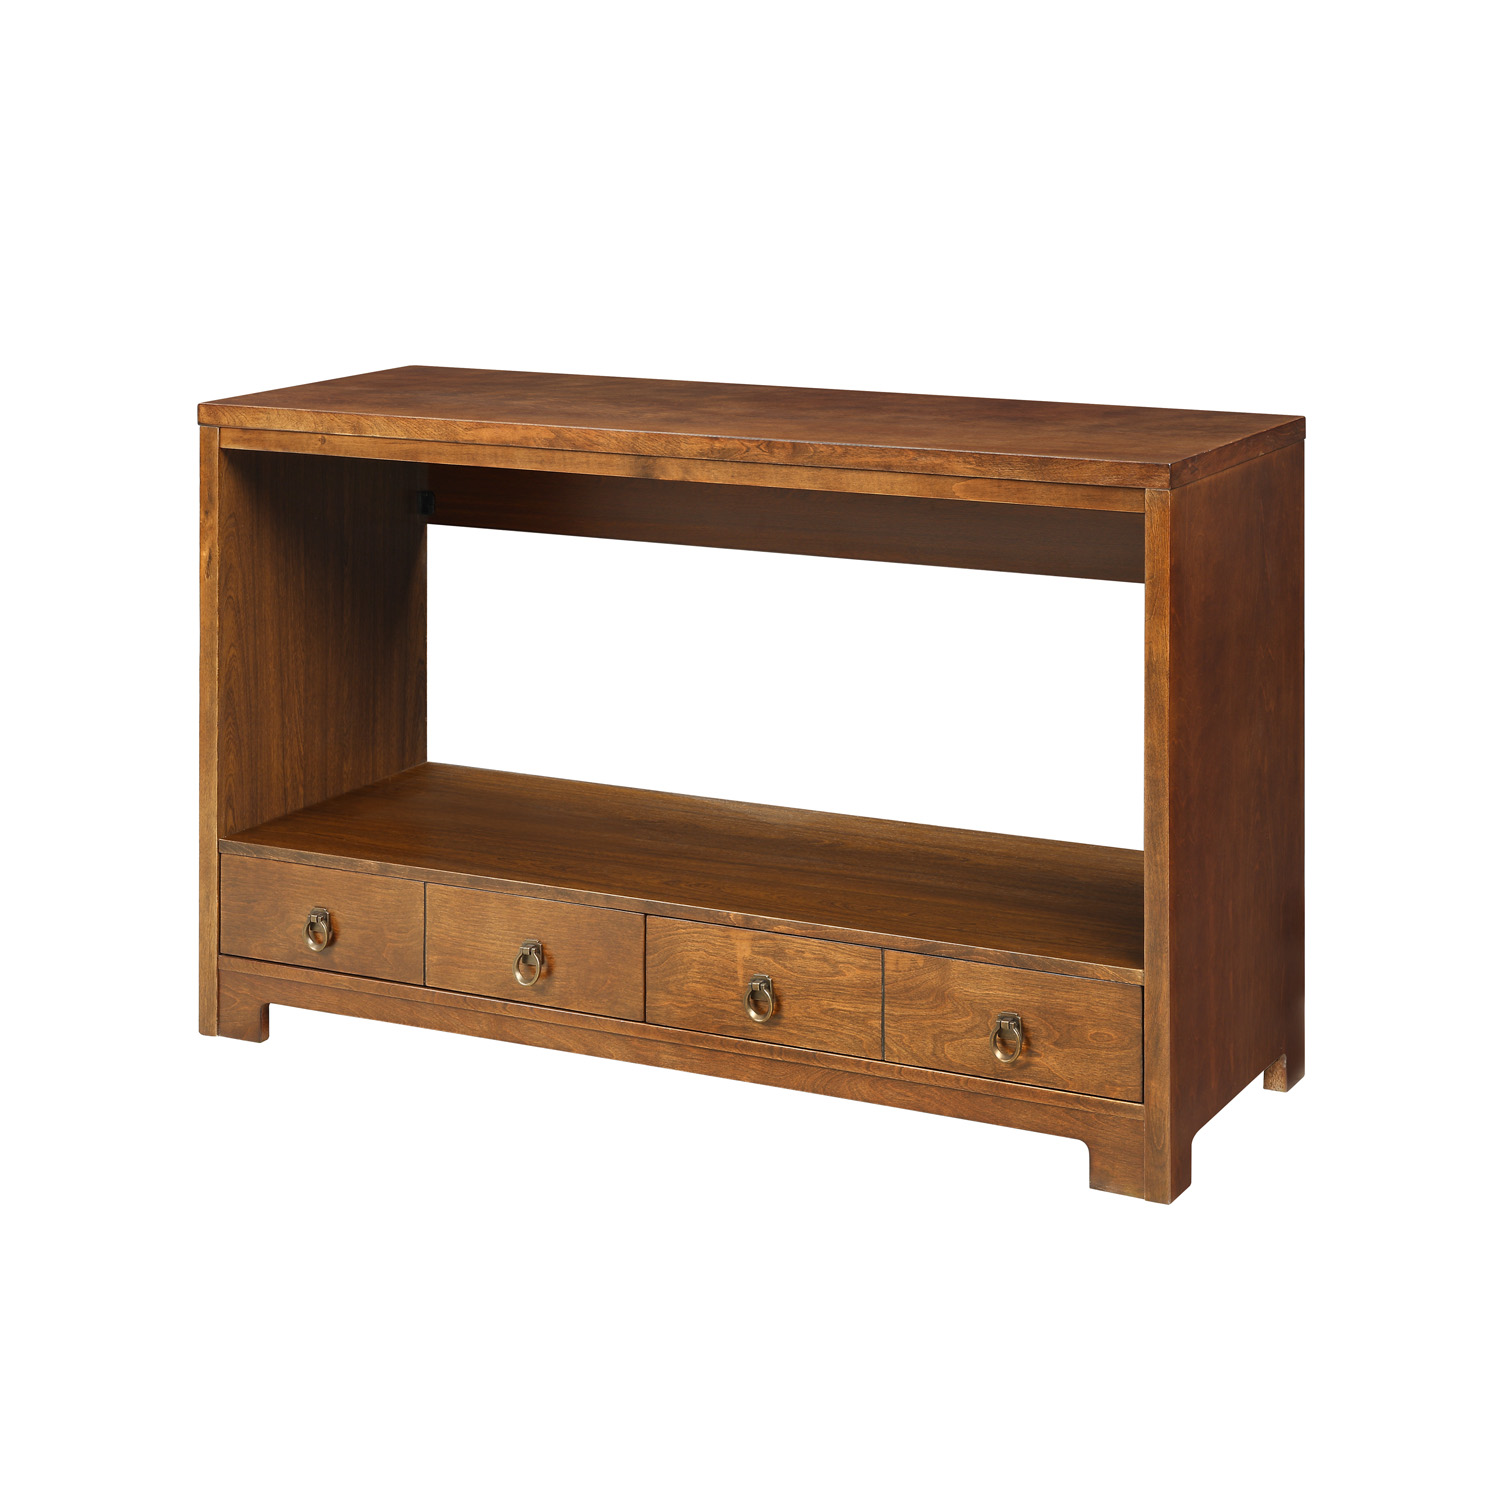 2-Drawer Console Table in Warm Mahogany